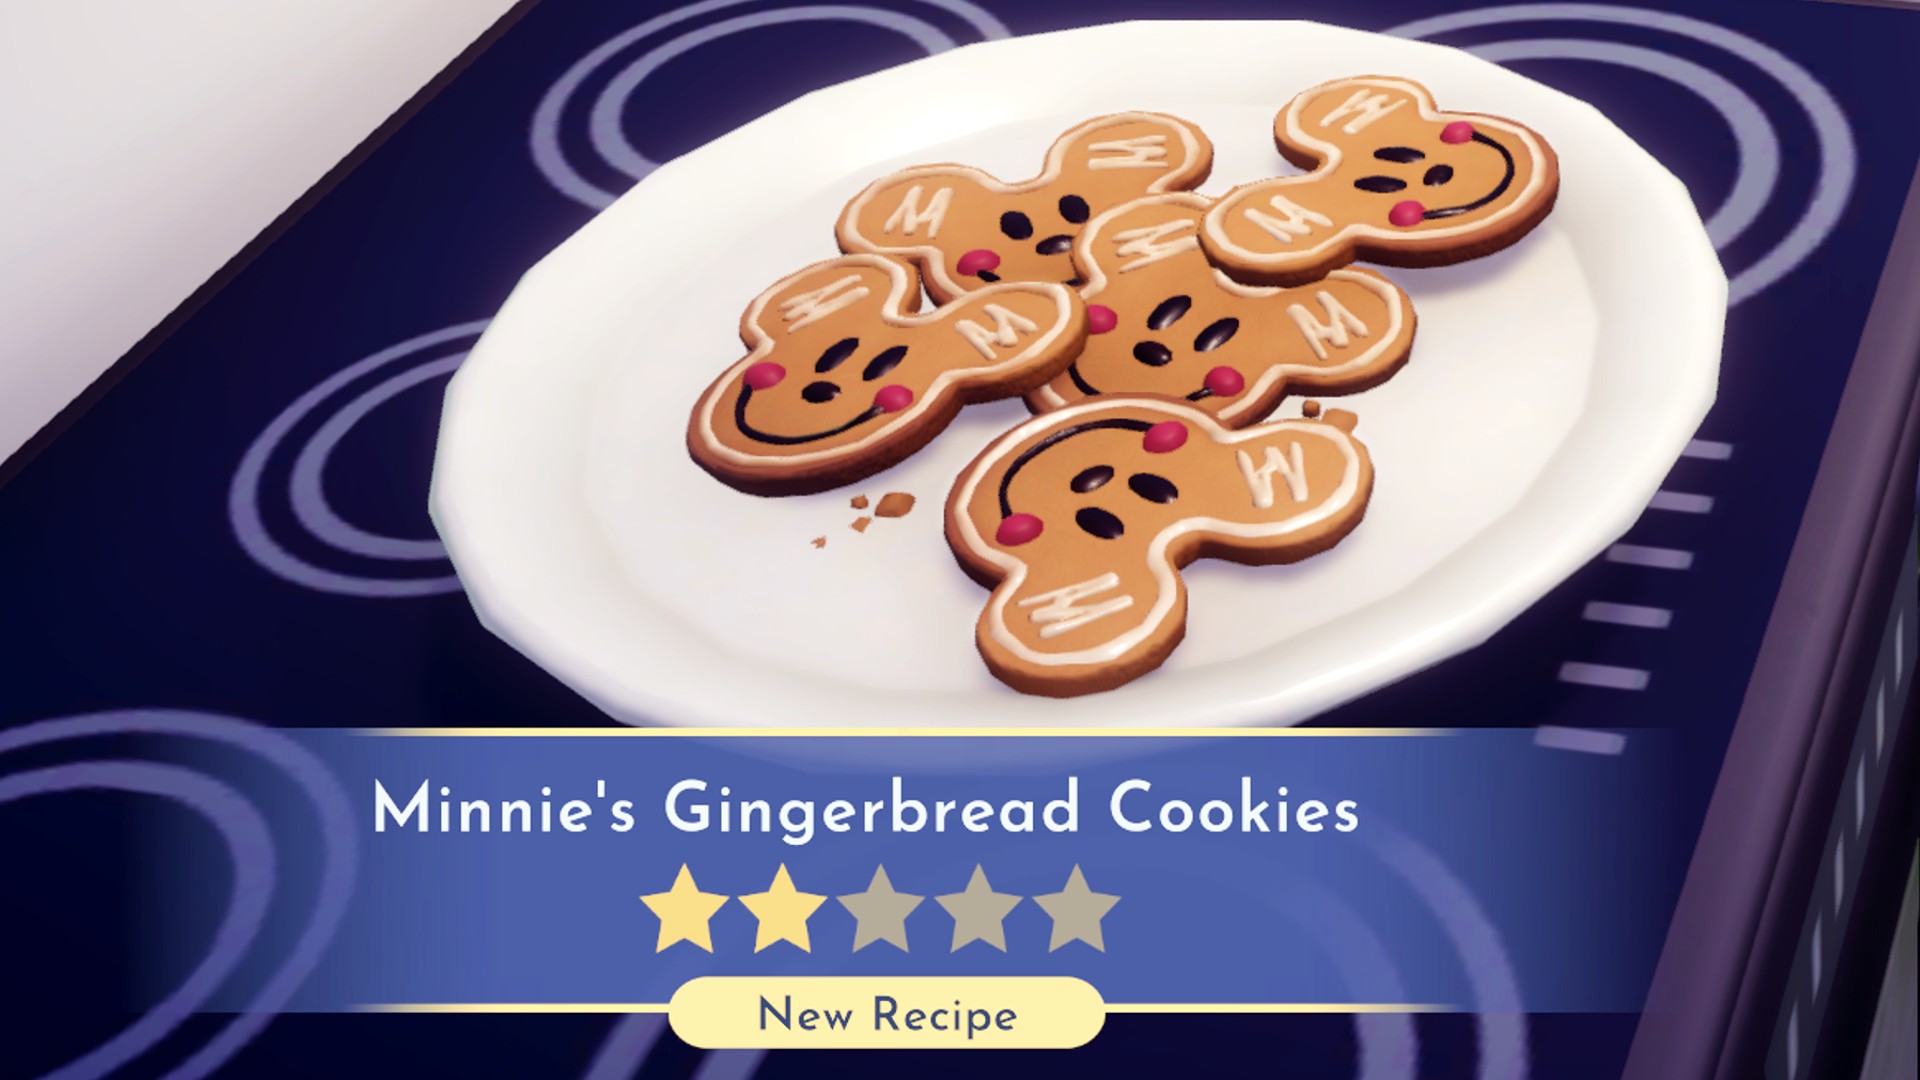 Delicious Disney Dreamlight Valley Recipes That Bring Magic to Your Table